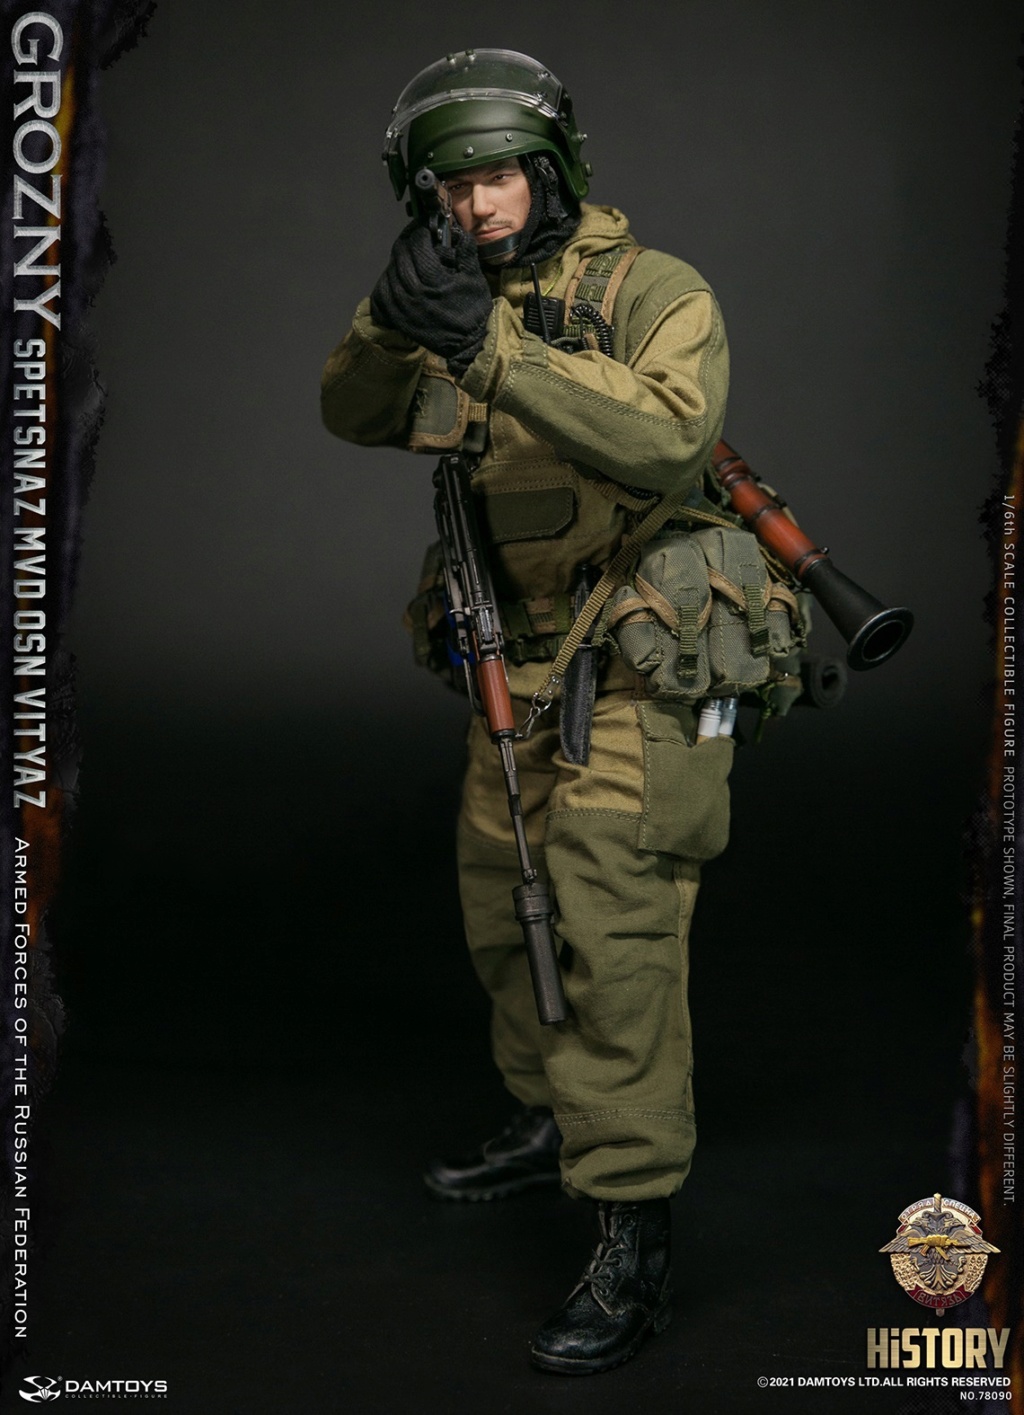 Spetsnaz - NEW PRODUCT: DAMTOYS: 1/6 Russian In-Service Warrior Special Forces - Grozny s78090 13571710